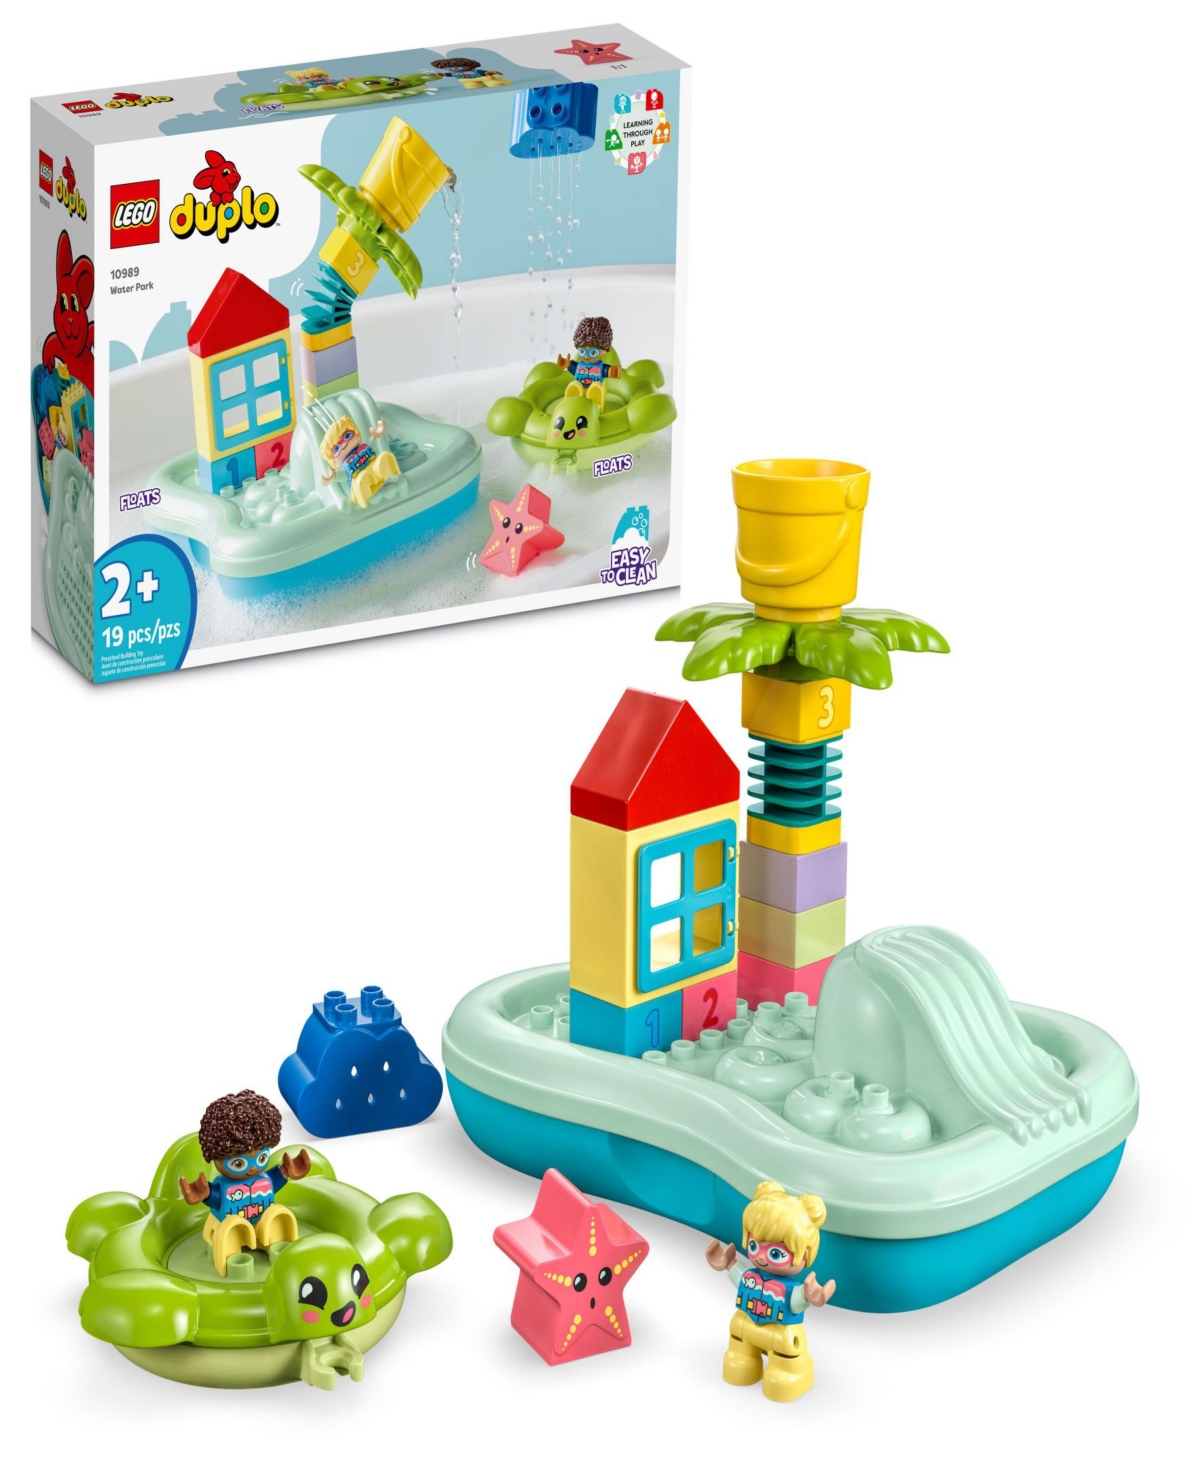 Lego Babies' Duplo Town Water Park Toddler Building Toy Set 10989 In Multicolor